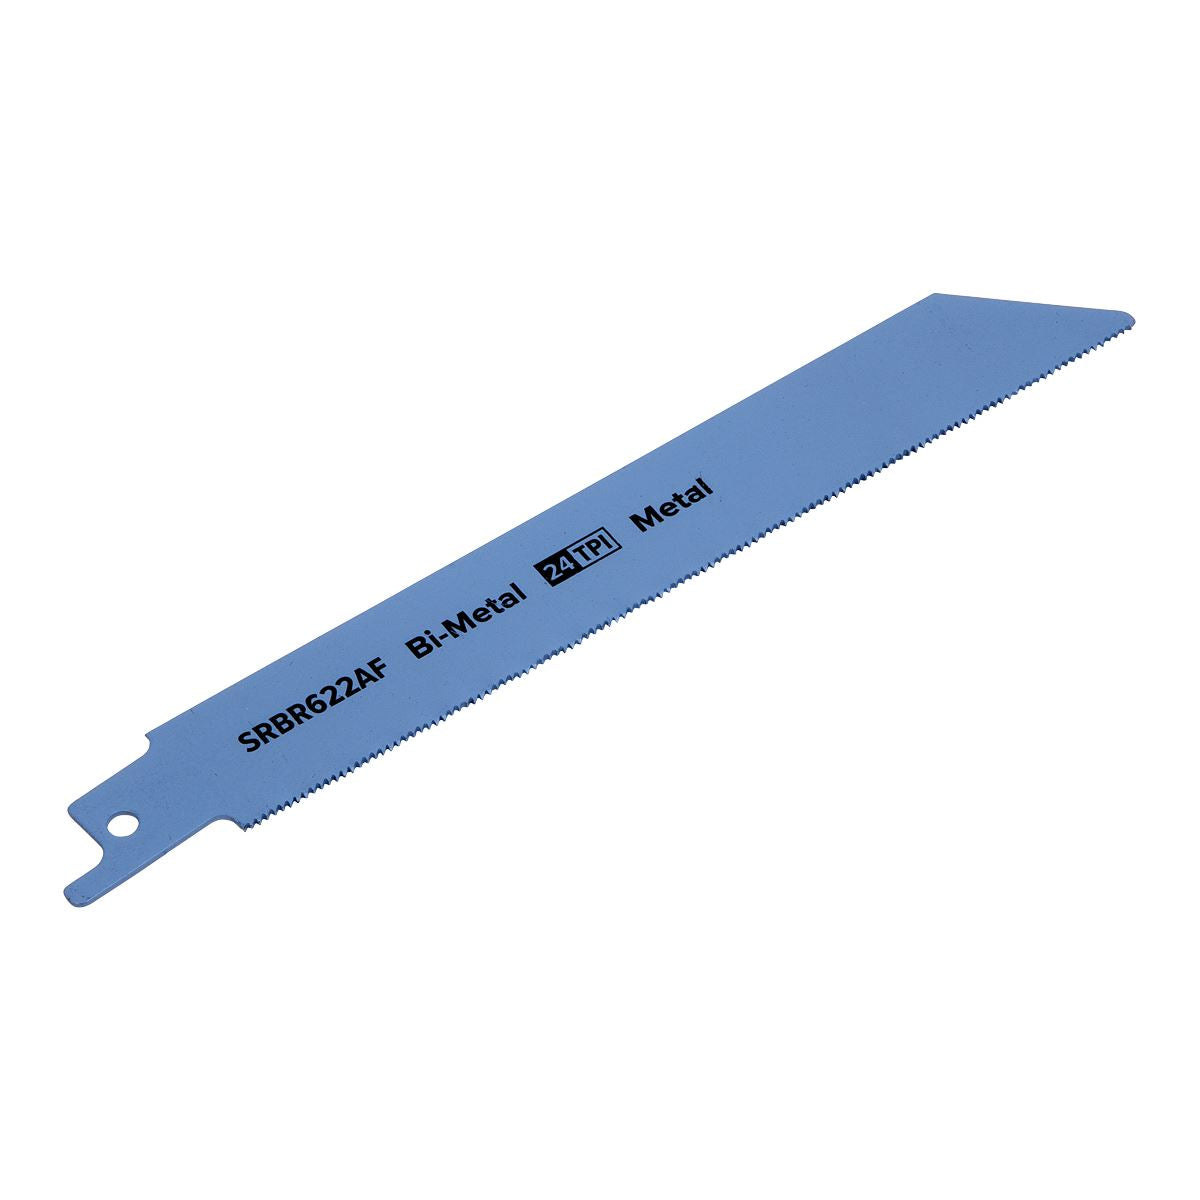 Sealey Reciprocating Saw Blade Metal 150mm 24tpi - Pack of 5